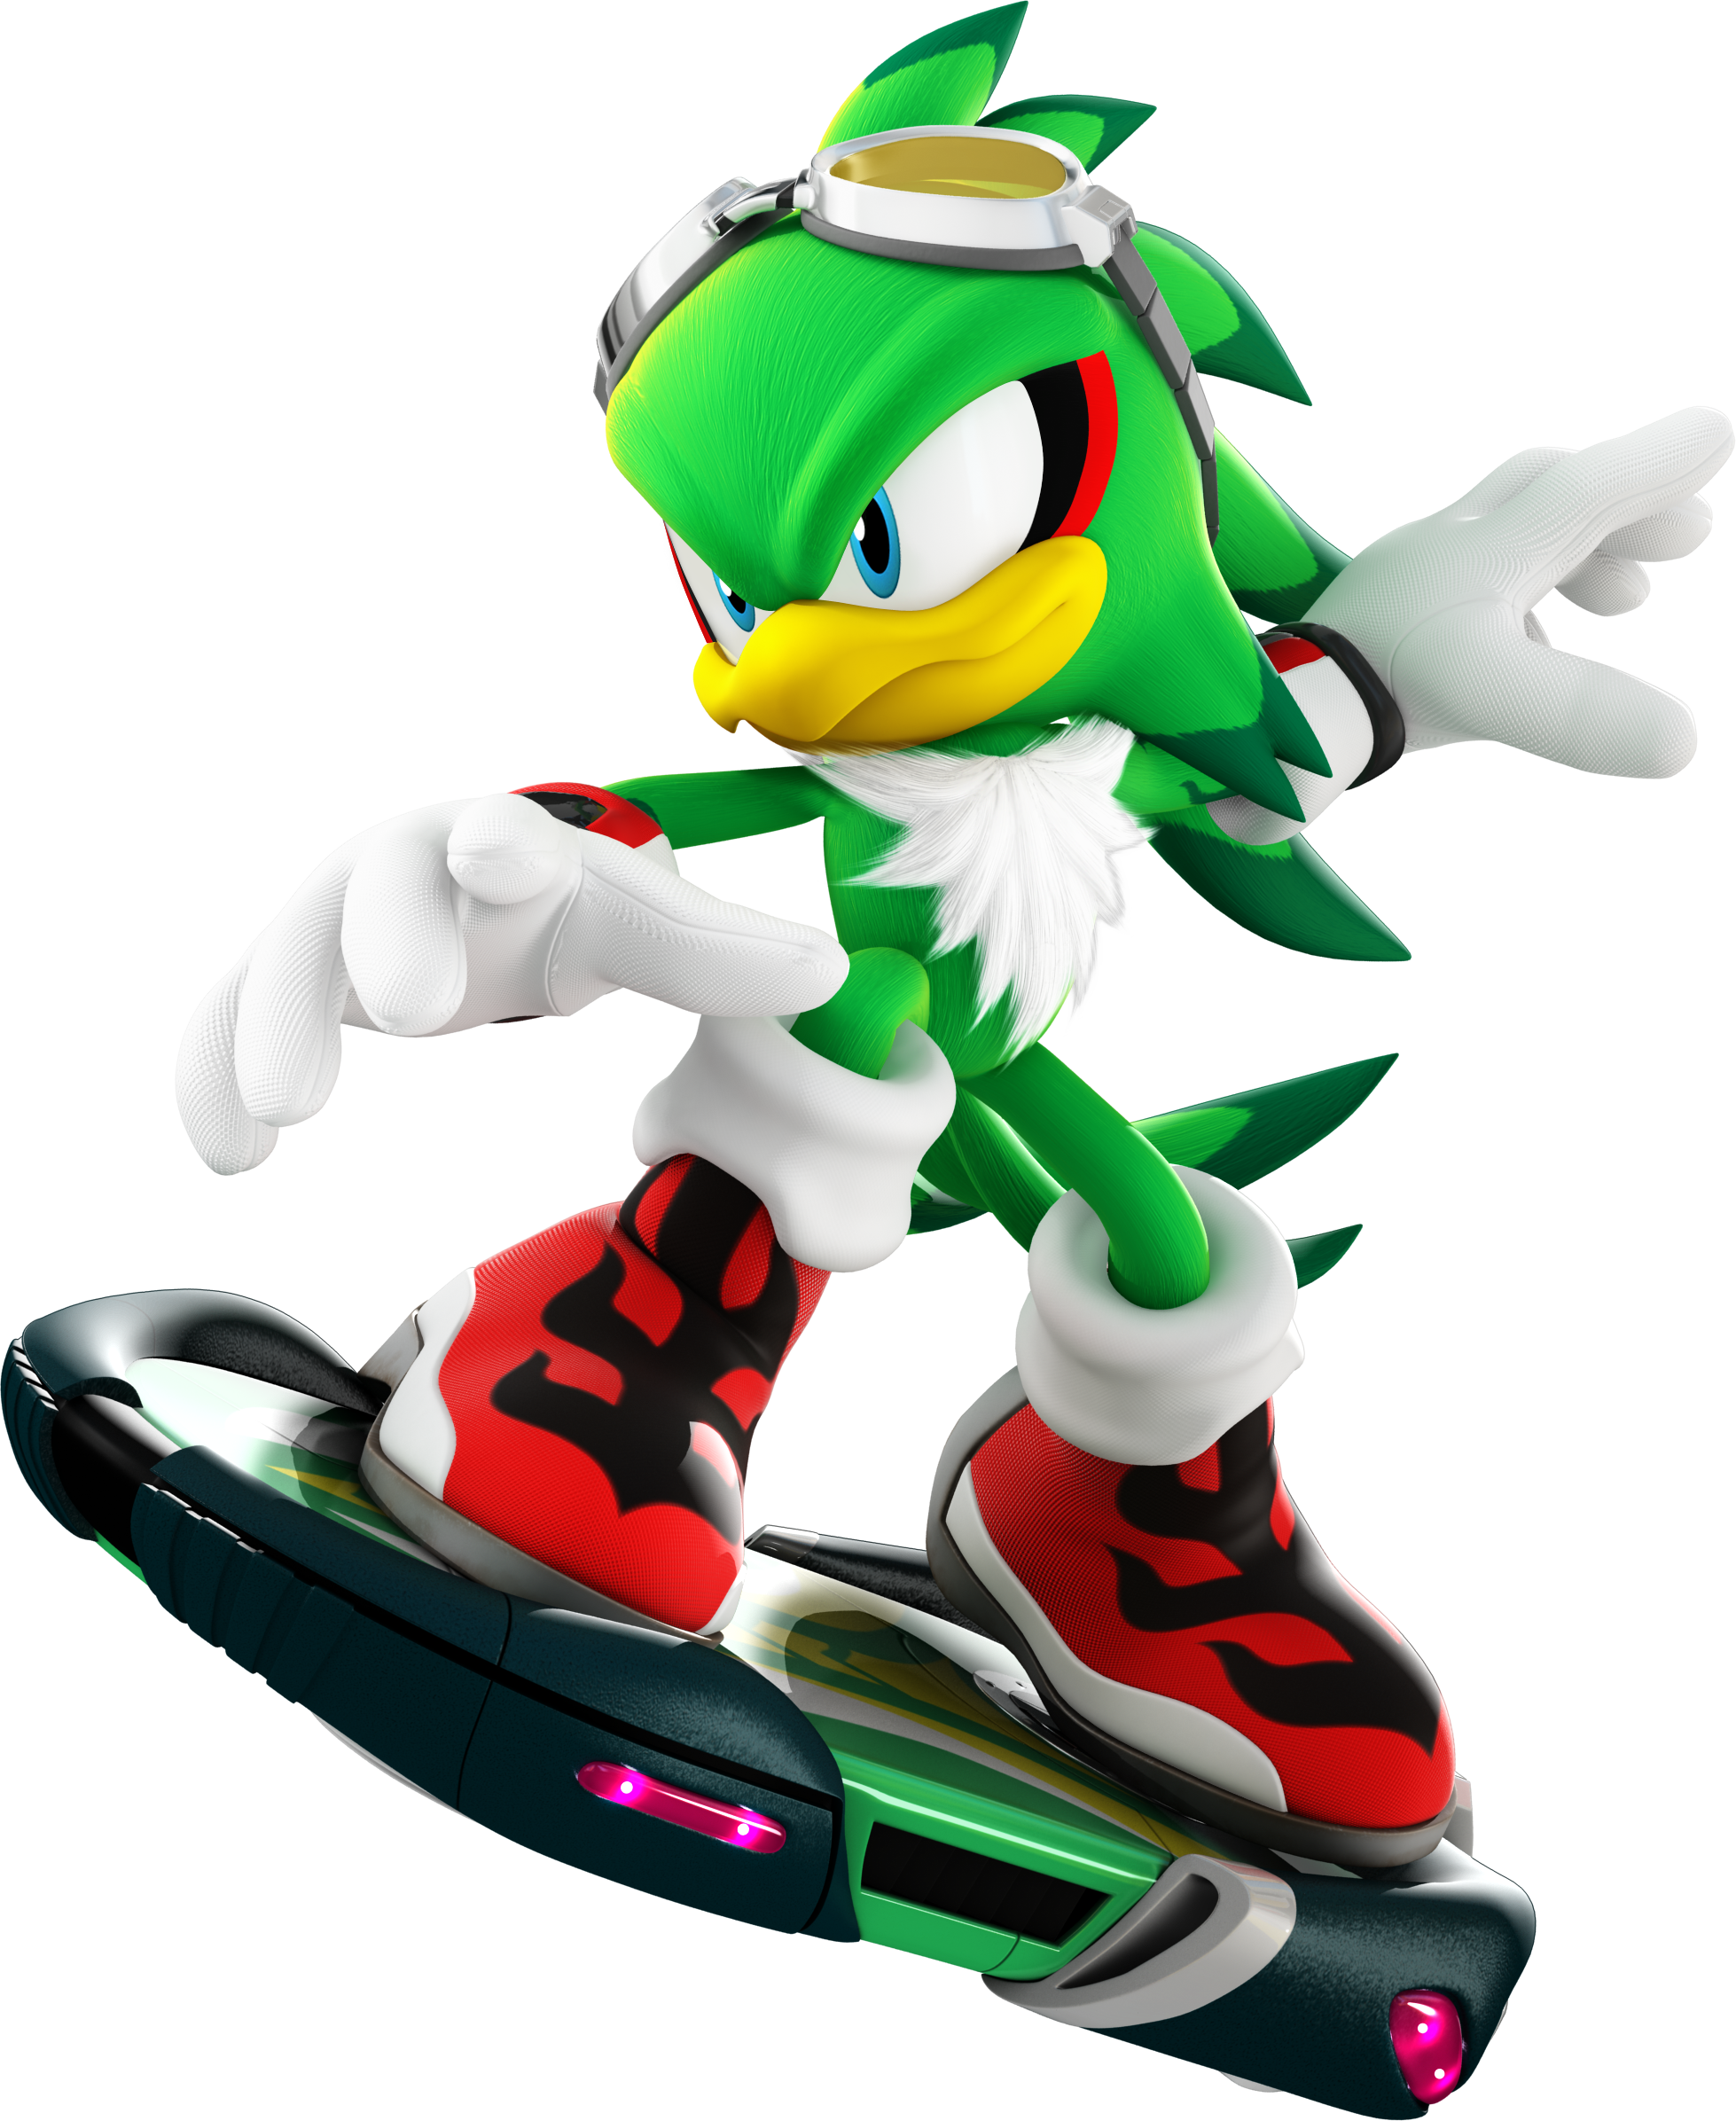 download sonic free riders sonic for free